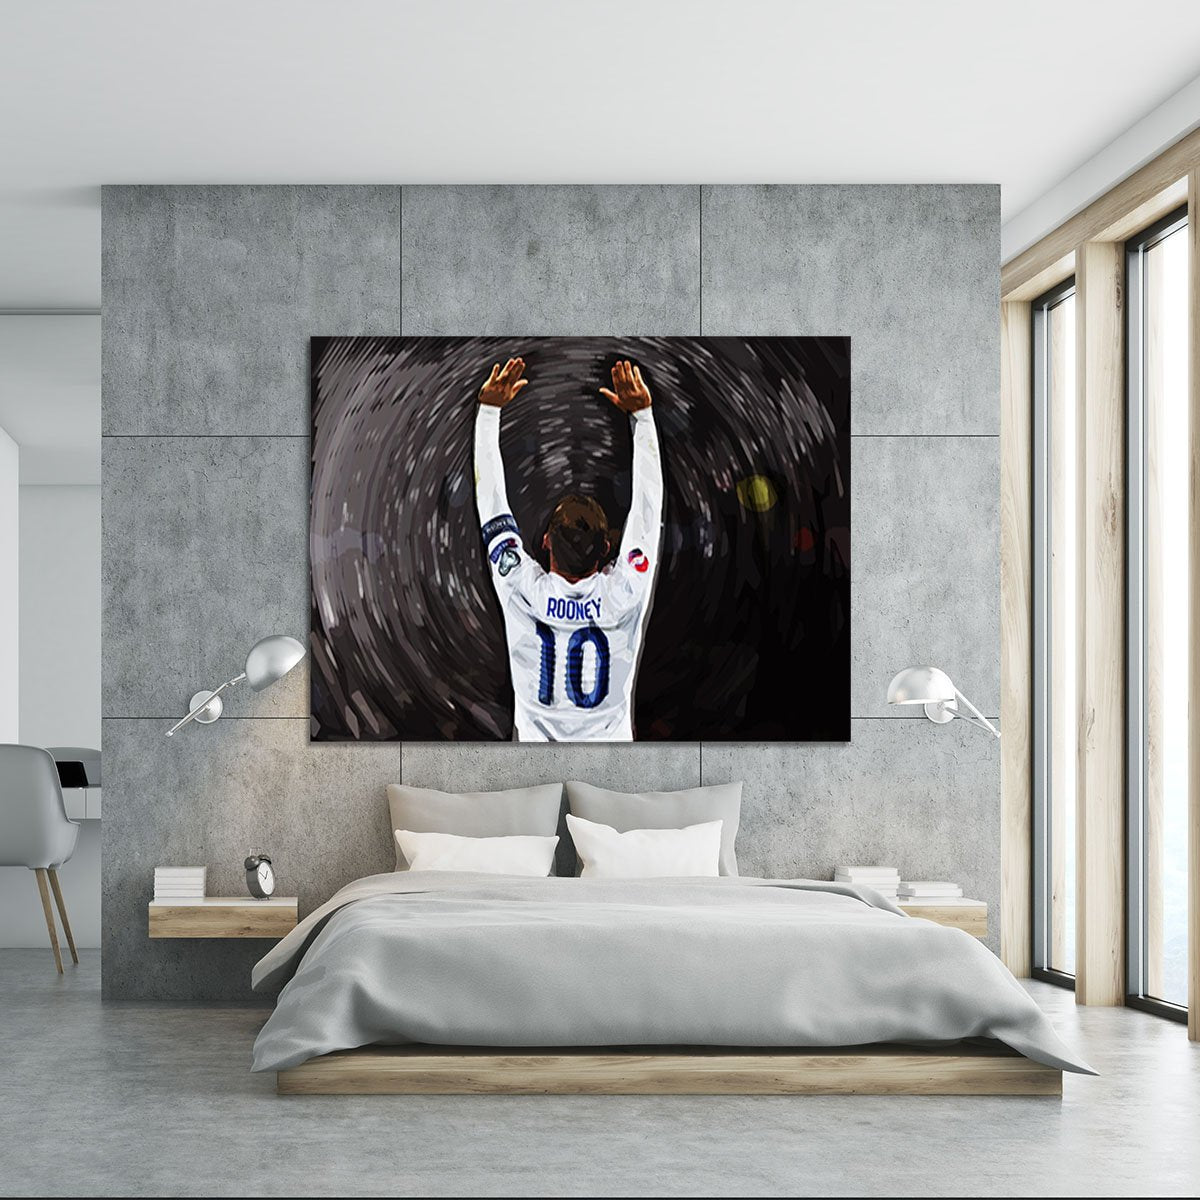 Rooney England Canvas Print or Poster